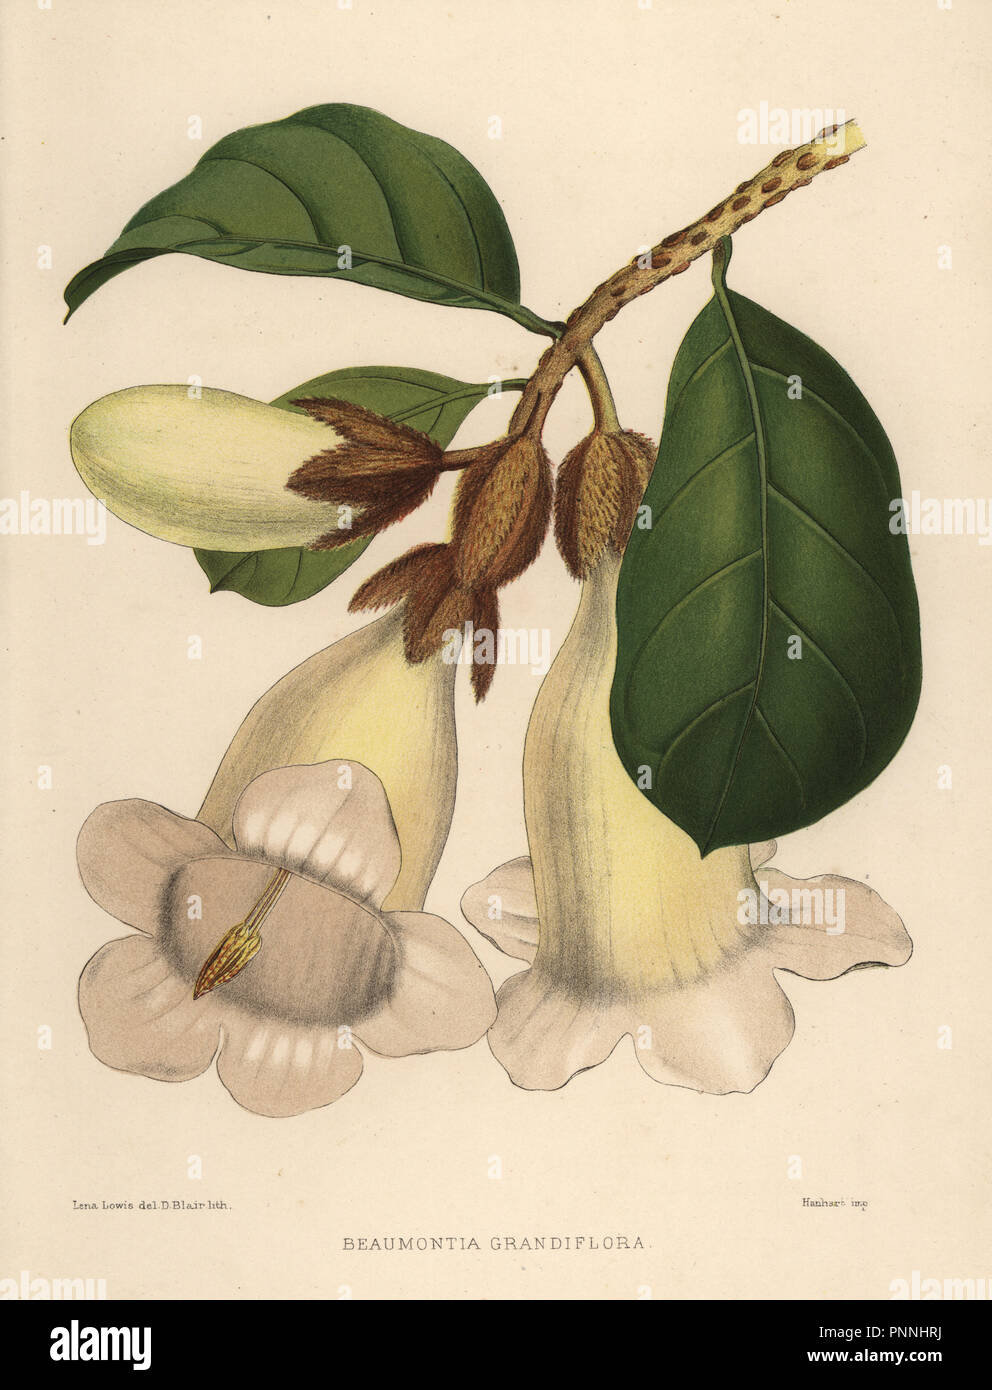 Nepal trumpet flower or herald's trumpet, Beaumontia grandiflora. Handcoloured lithograph by D. Blair after an illustration by Lena Lowis from her Familiar Indian Flowers with Coloured Plates, L. Reeve, London, 1878. Lena Lowis, formerly Selena Caroline Shakespear (1845-1919), was a British woman artist who traveled to India with her husband Lt.-Col. Ninian Lowis. Stock Photo